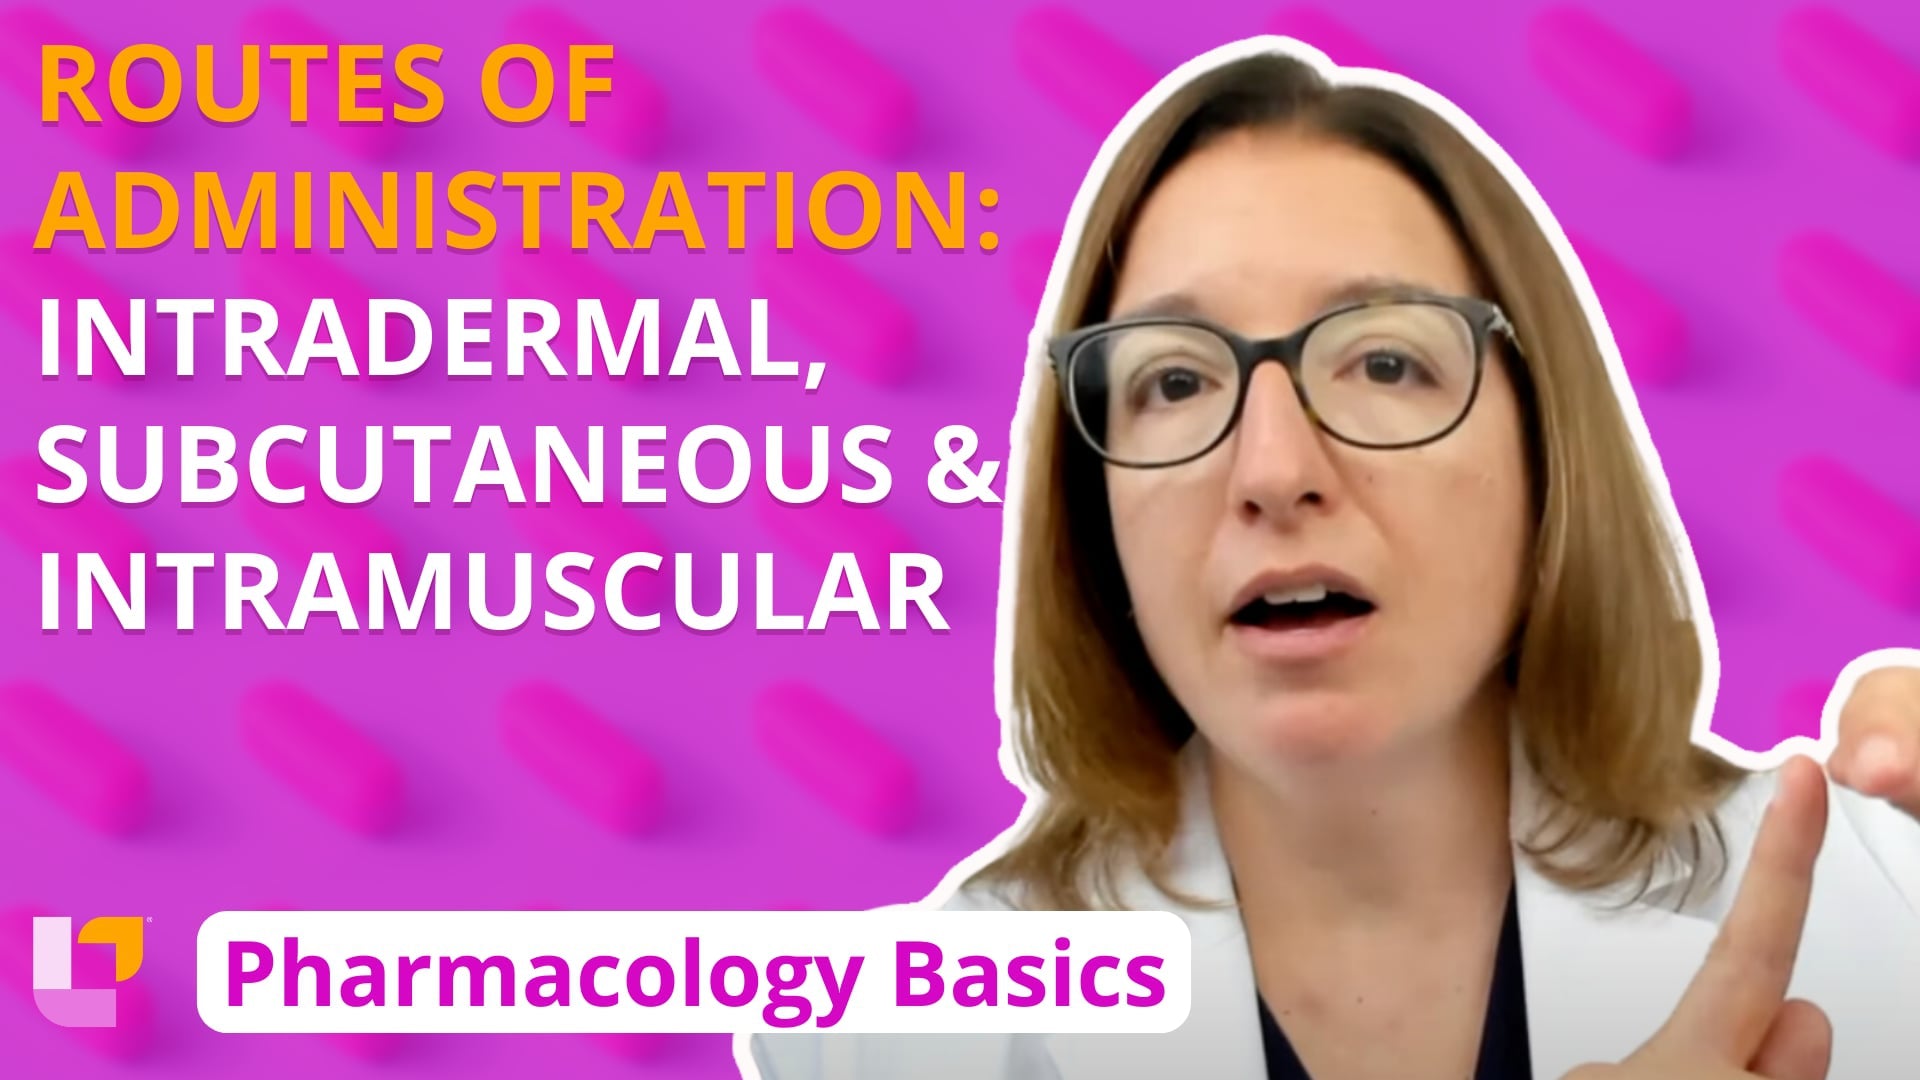 Pharm Basics, part 6: Routes of Administration: Intradermal, Subcutaneous, Intramuscular - LevelUpRN